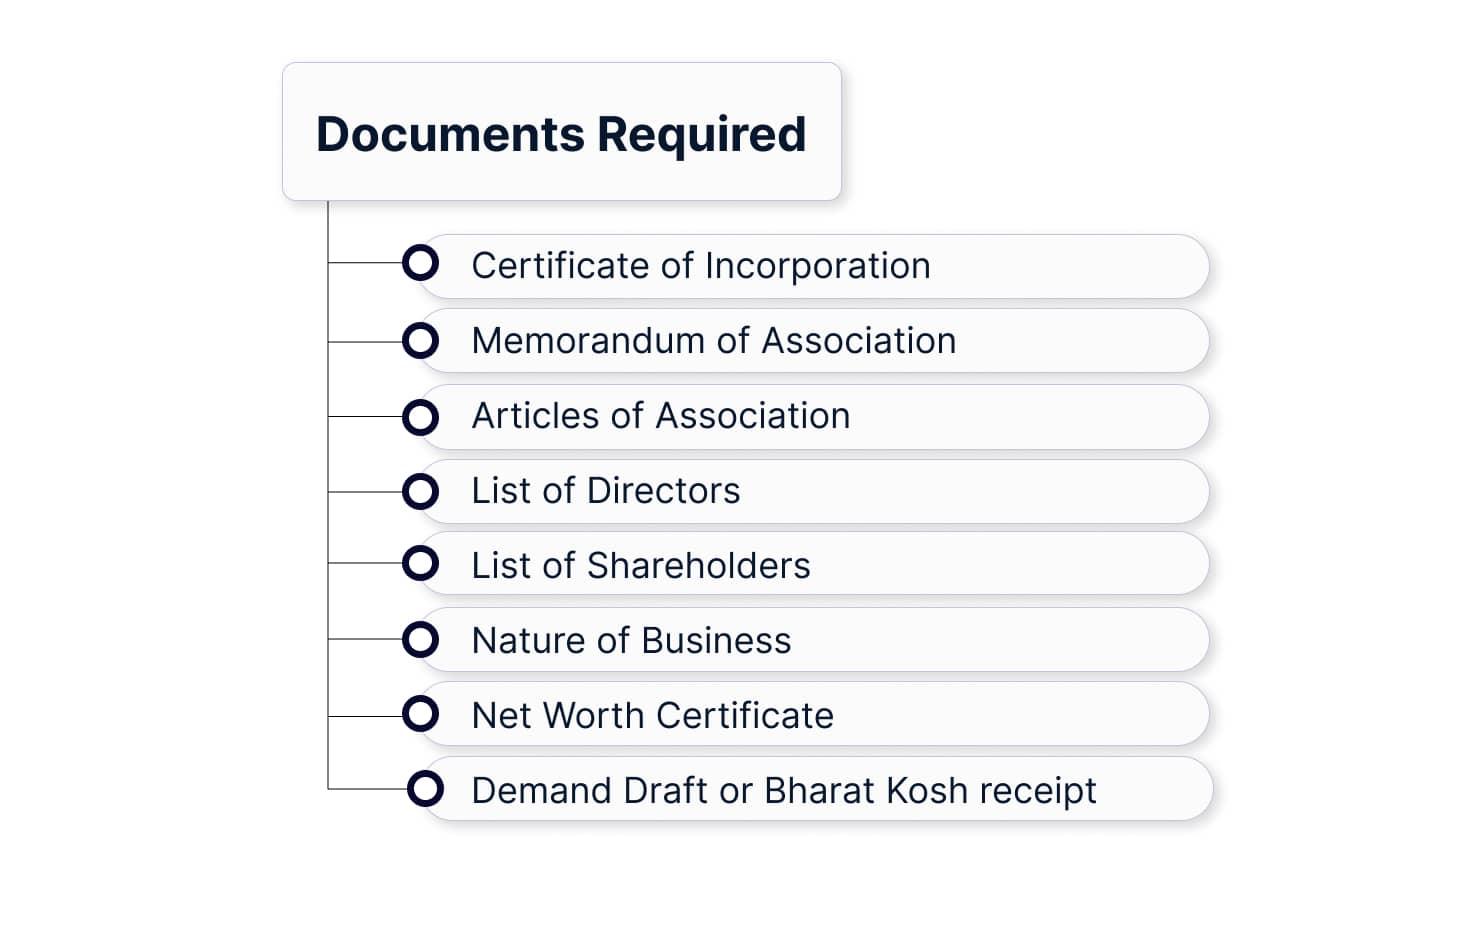 Documents Required for Unified License and VNO License